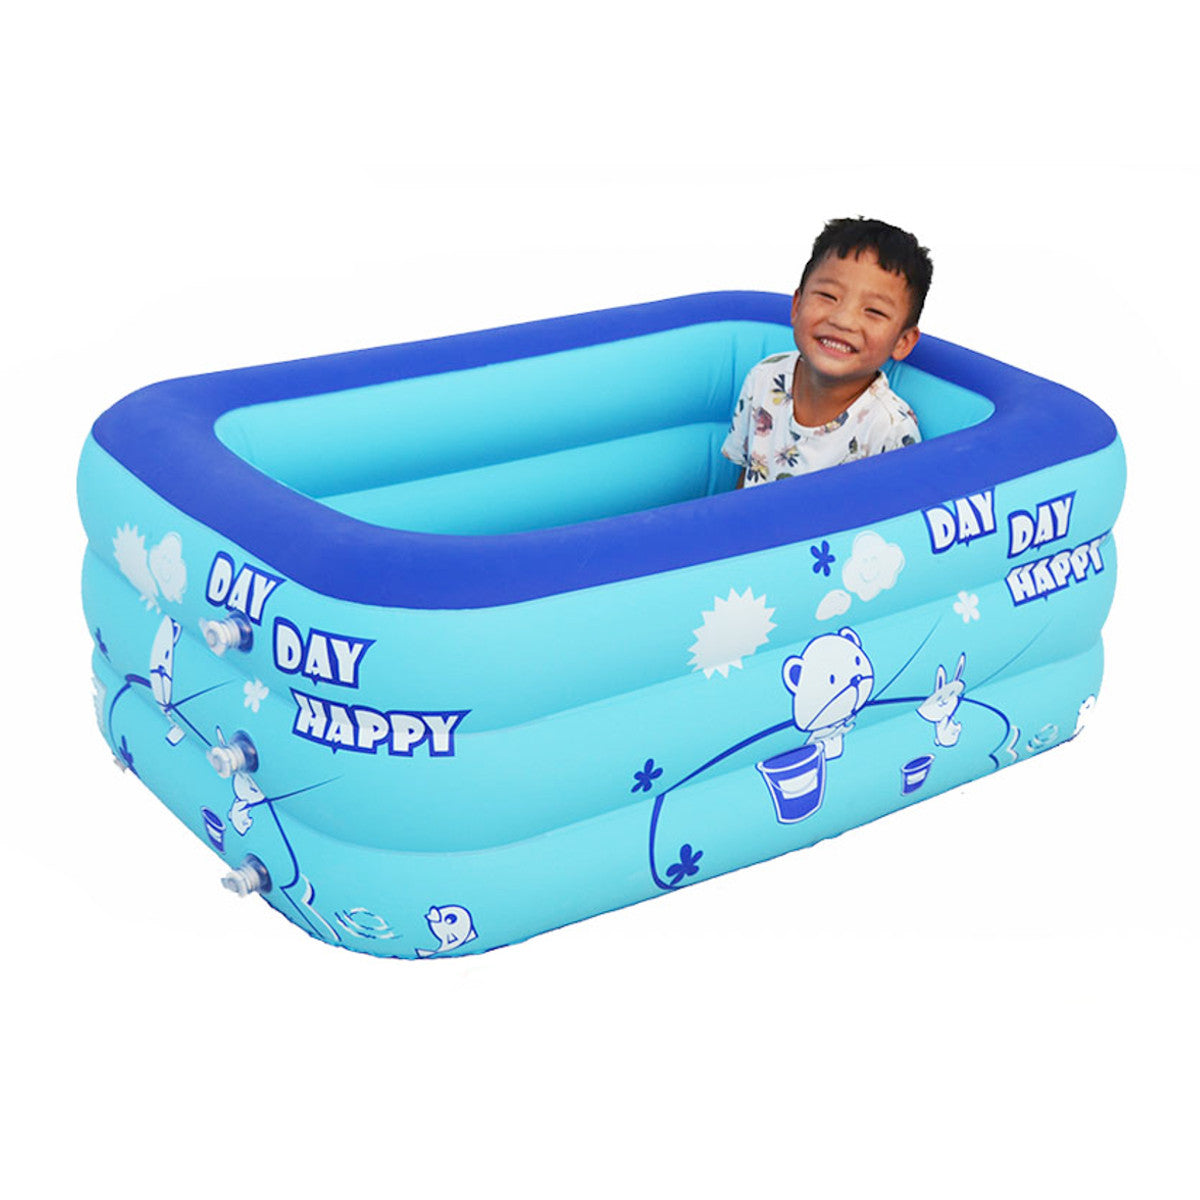 Kids Baby Children Inflatable Swimming Pool 3 Layer Pool Summer Water Fun Play Toy